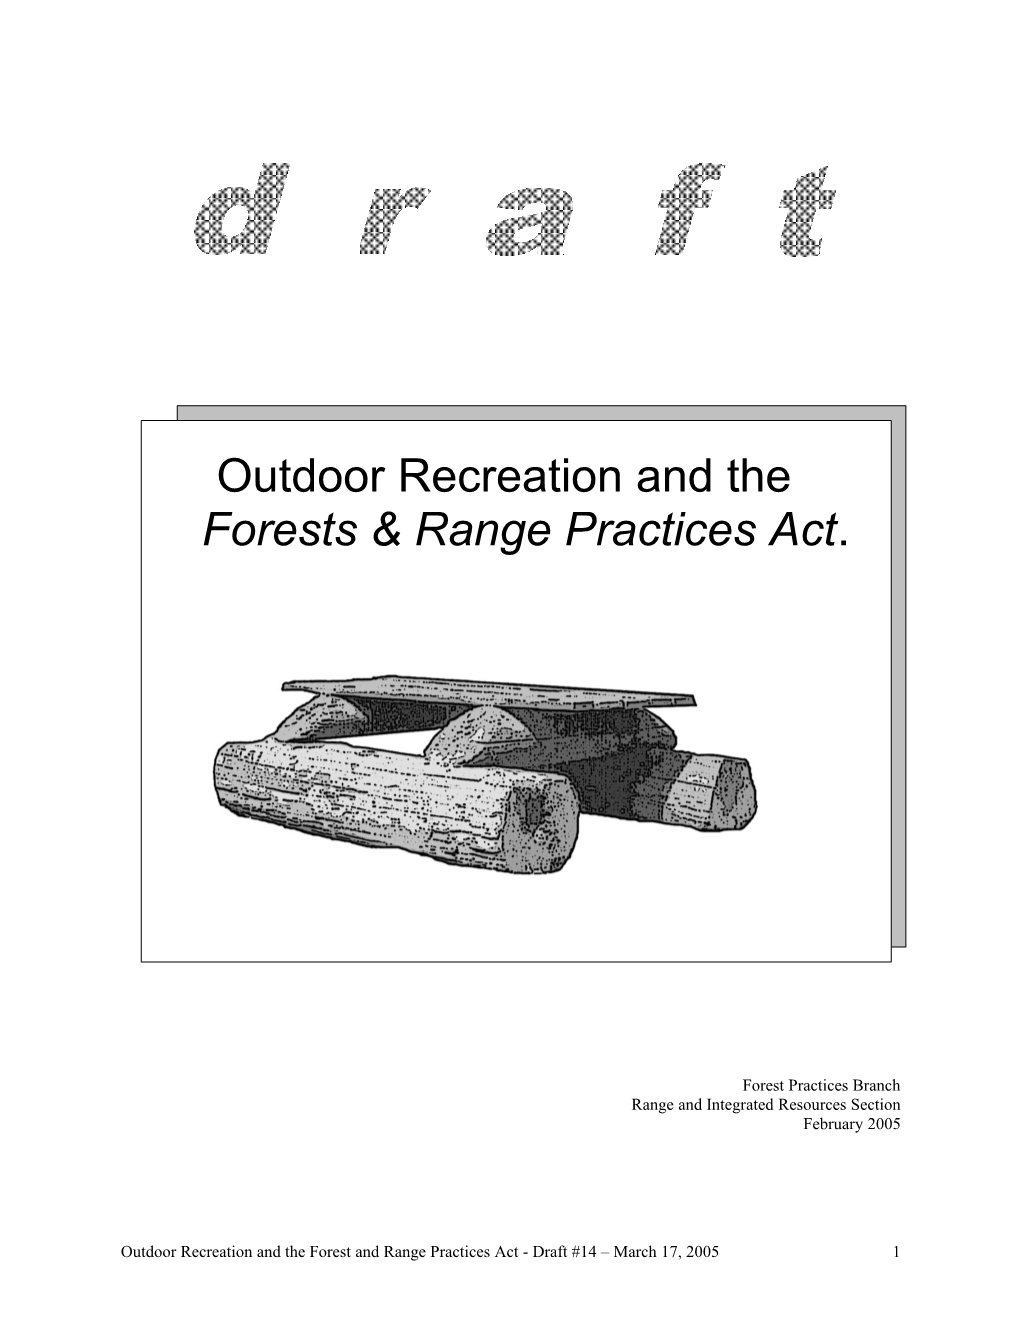 Outdoor Recreation and The